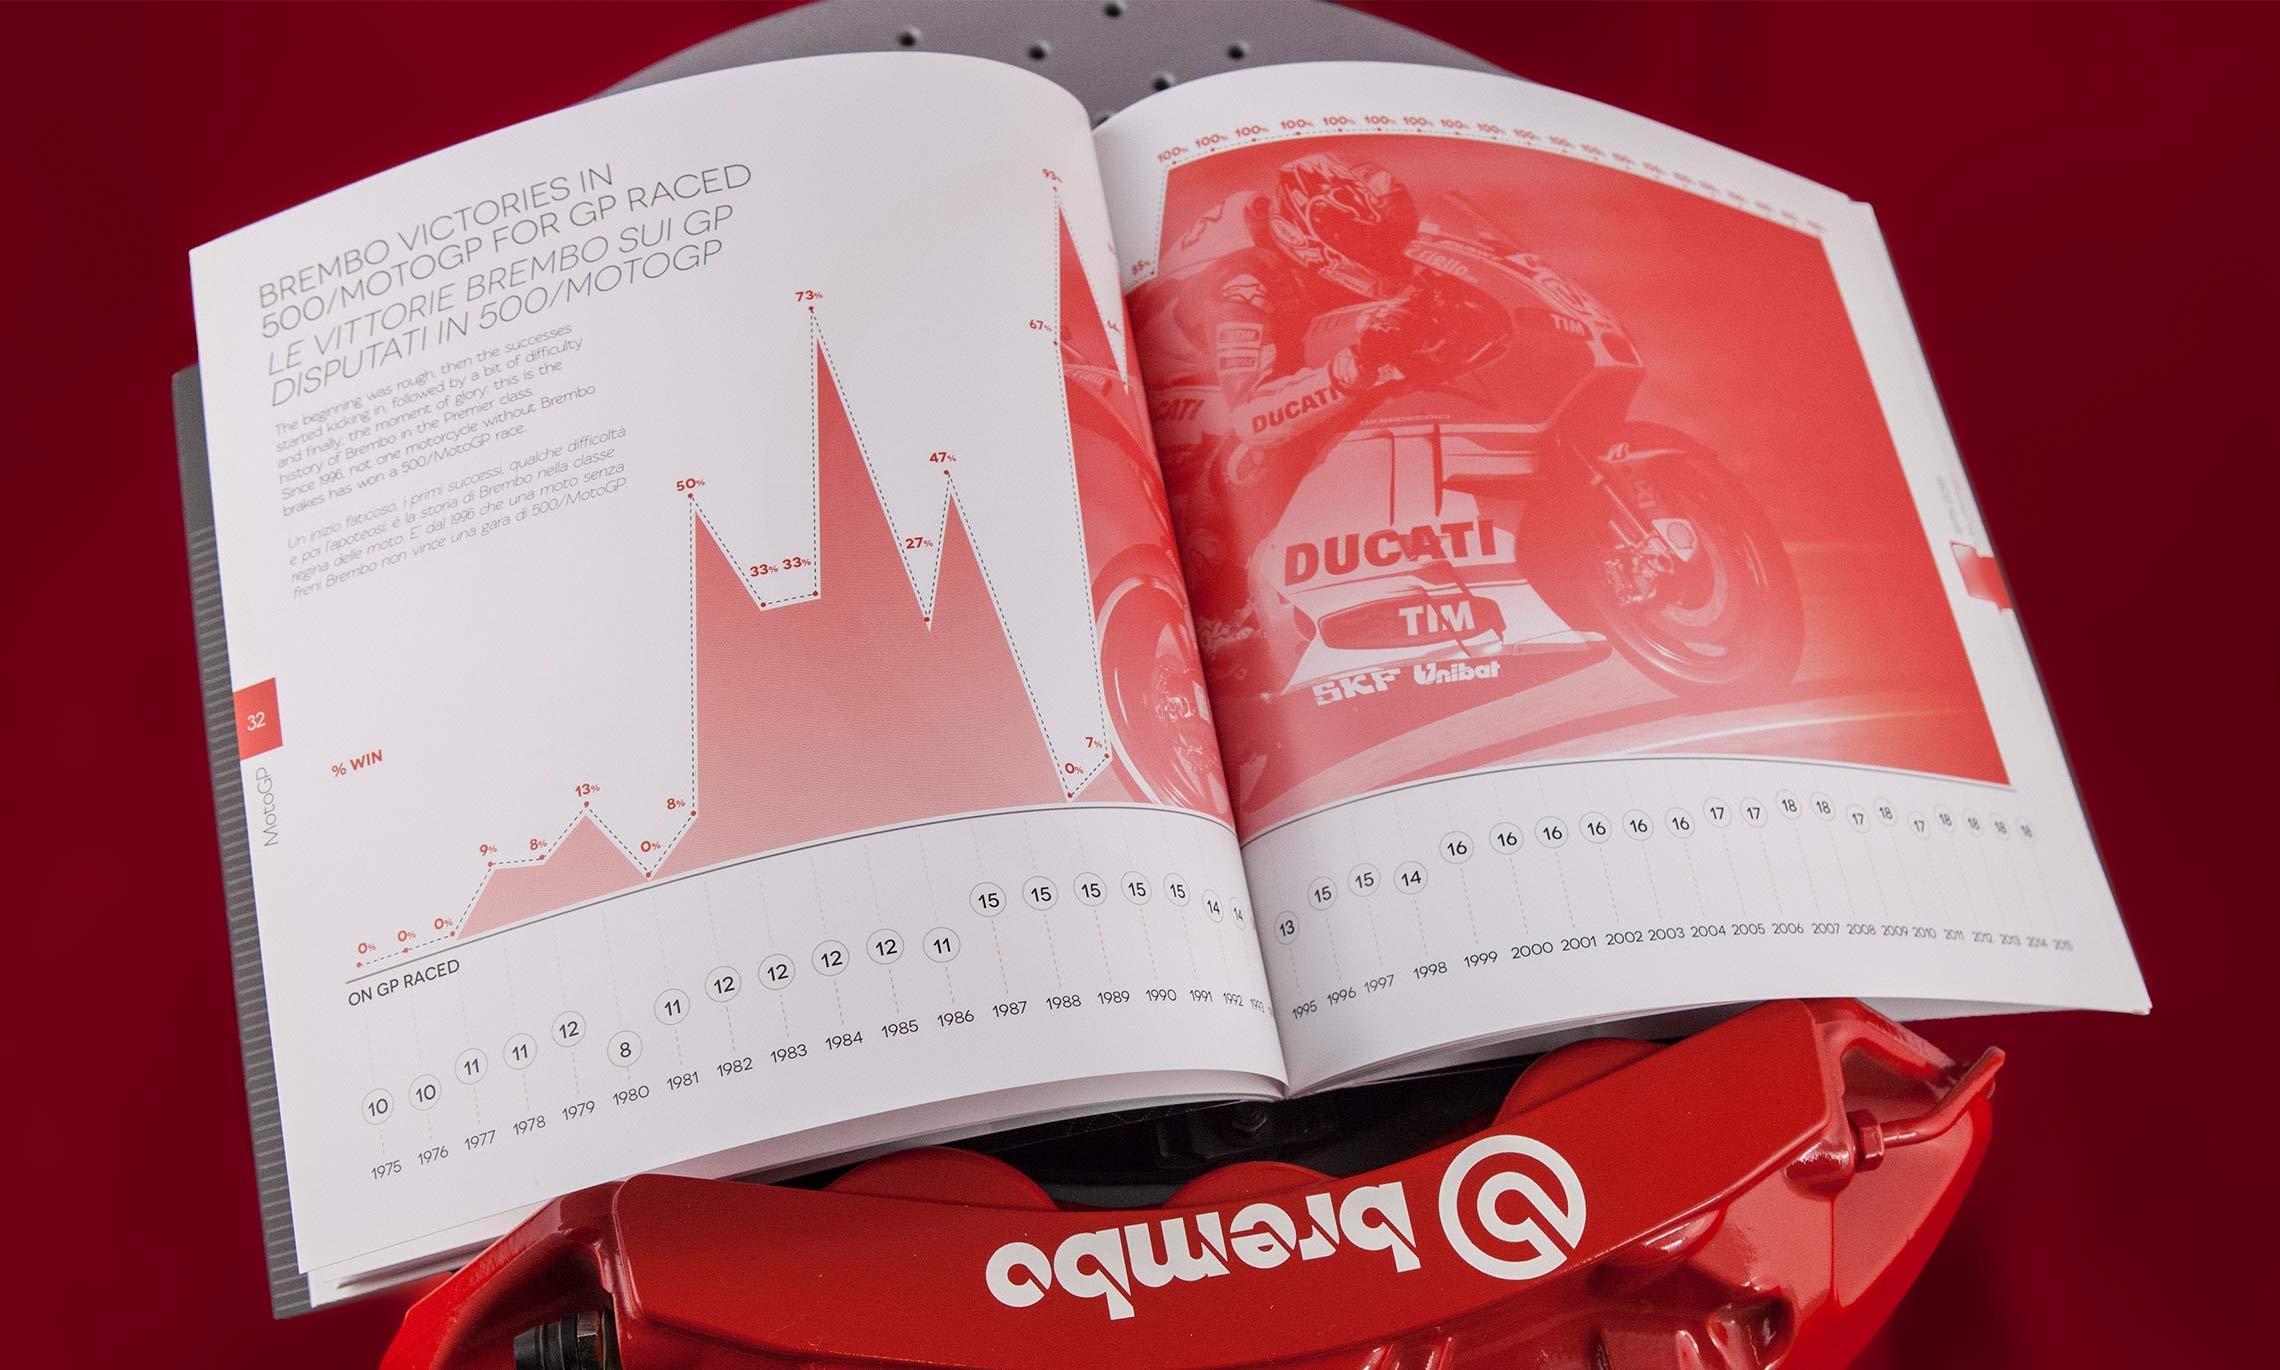 Brembo infographics 2016 illustrated book by The Visual Agency